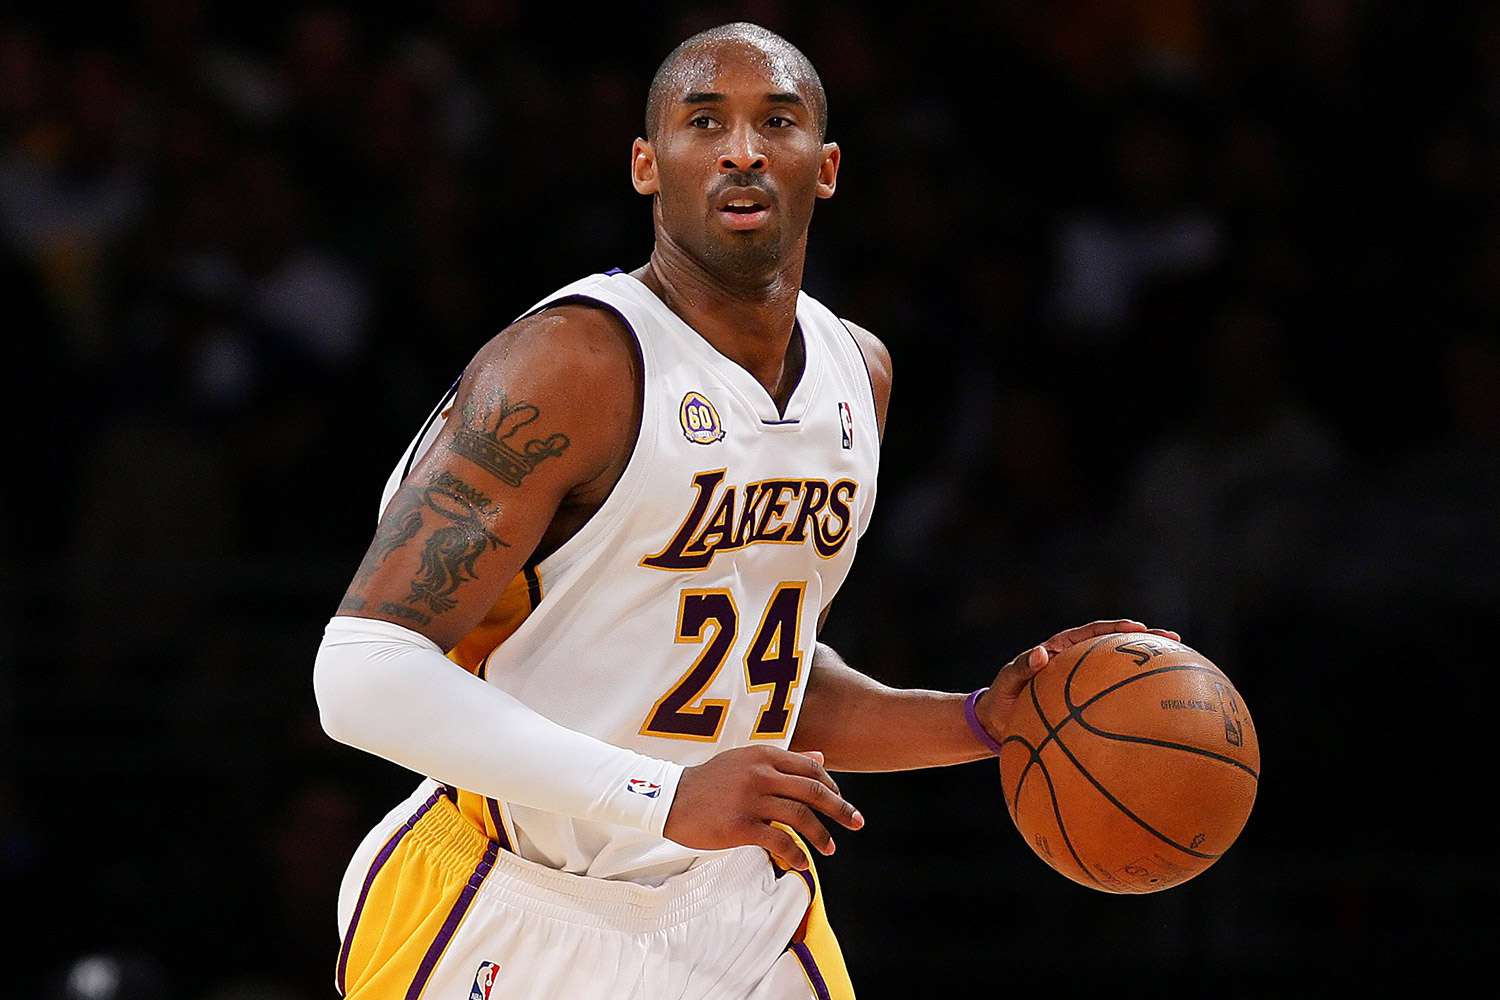 The Blockbuster Trade That Almost Shook the NBA Kobe Bryant's Near-Move to Detroit Pistons